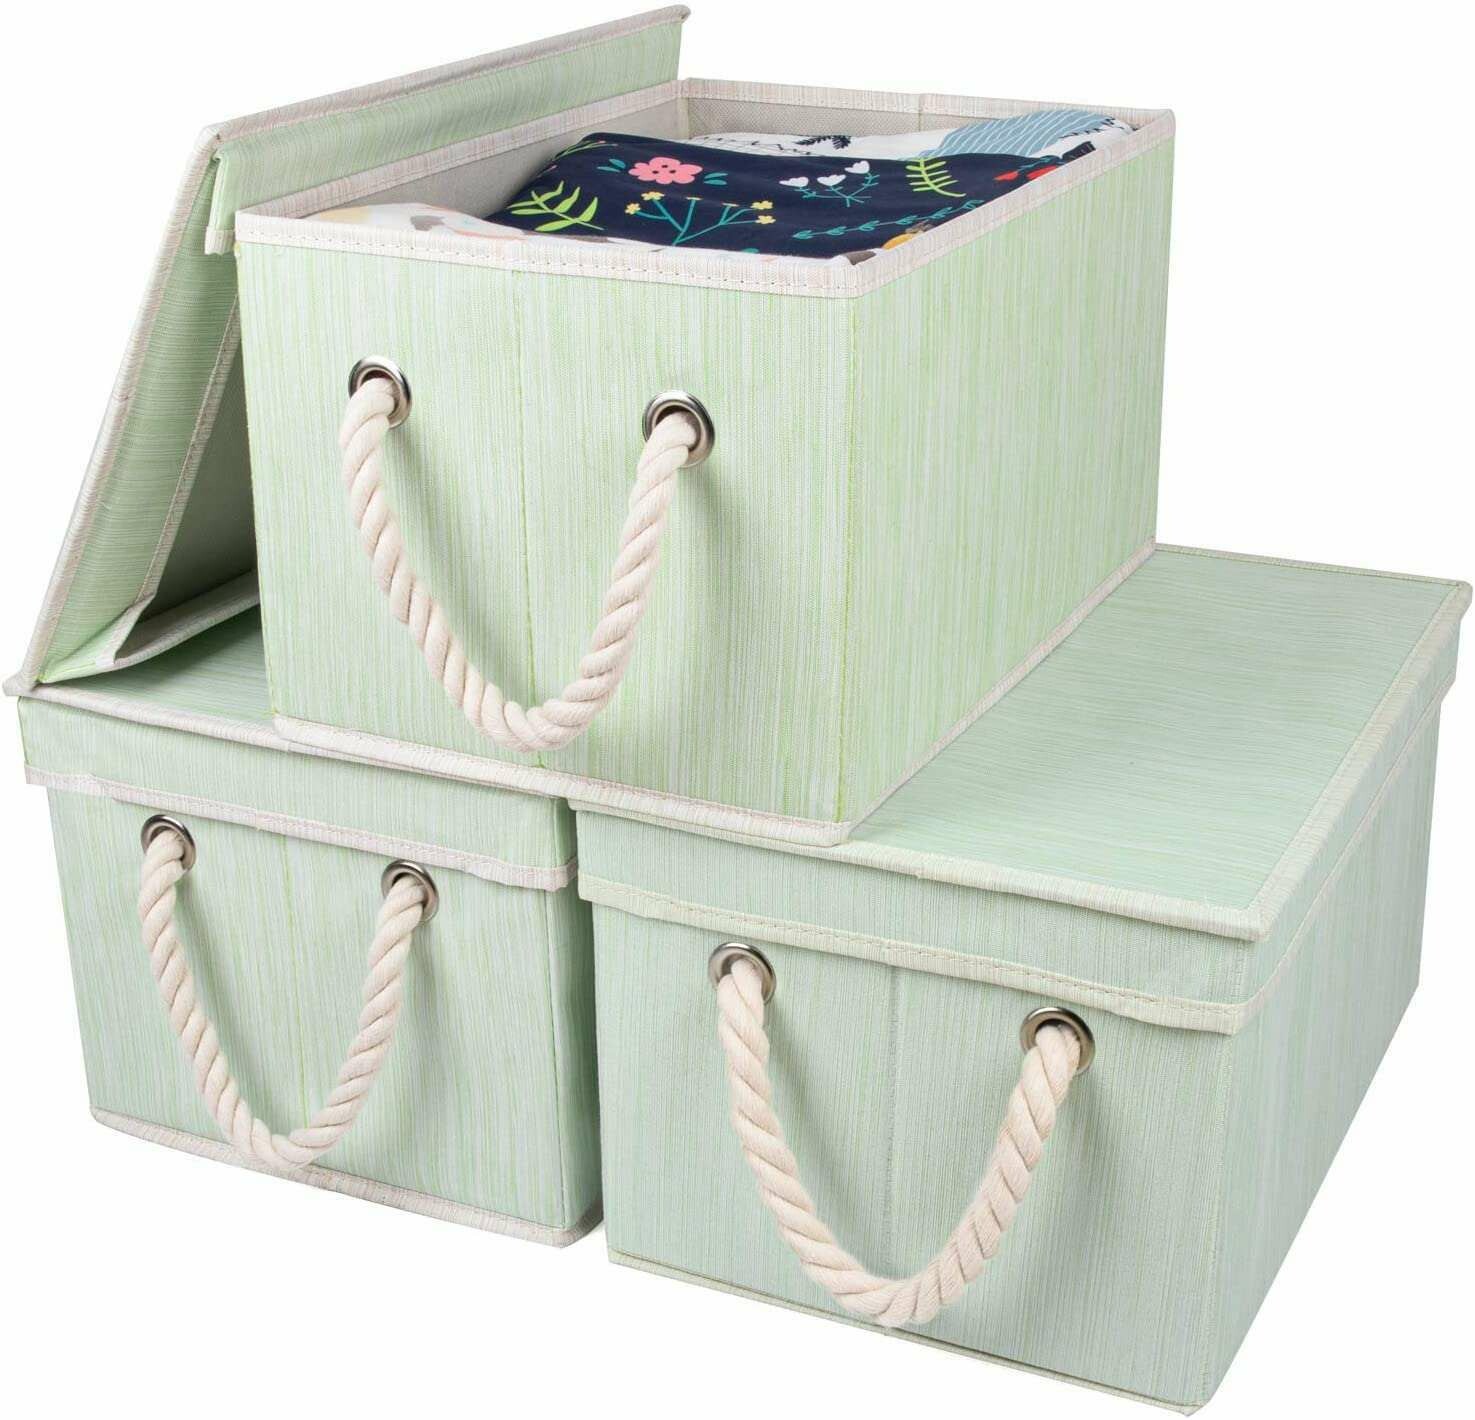 Closet Organizers and Storage Bins for Shelves Foldable Storage Baskets for Organizing with Rope Handles, Collapsible Fabric Cube Organization Boxes ,Cotton Green L37XW25X21cm